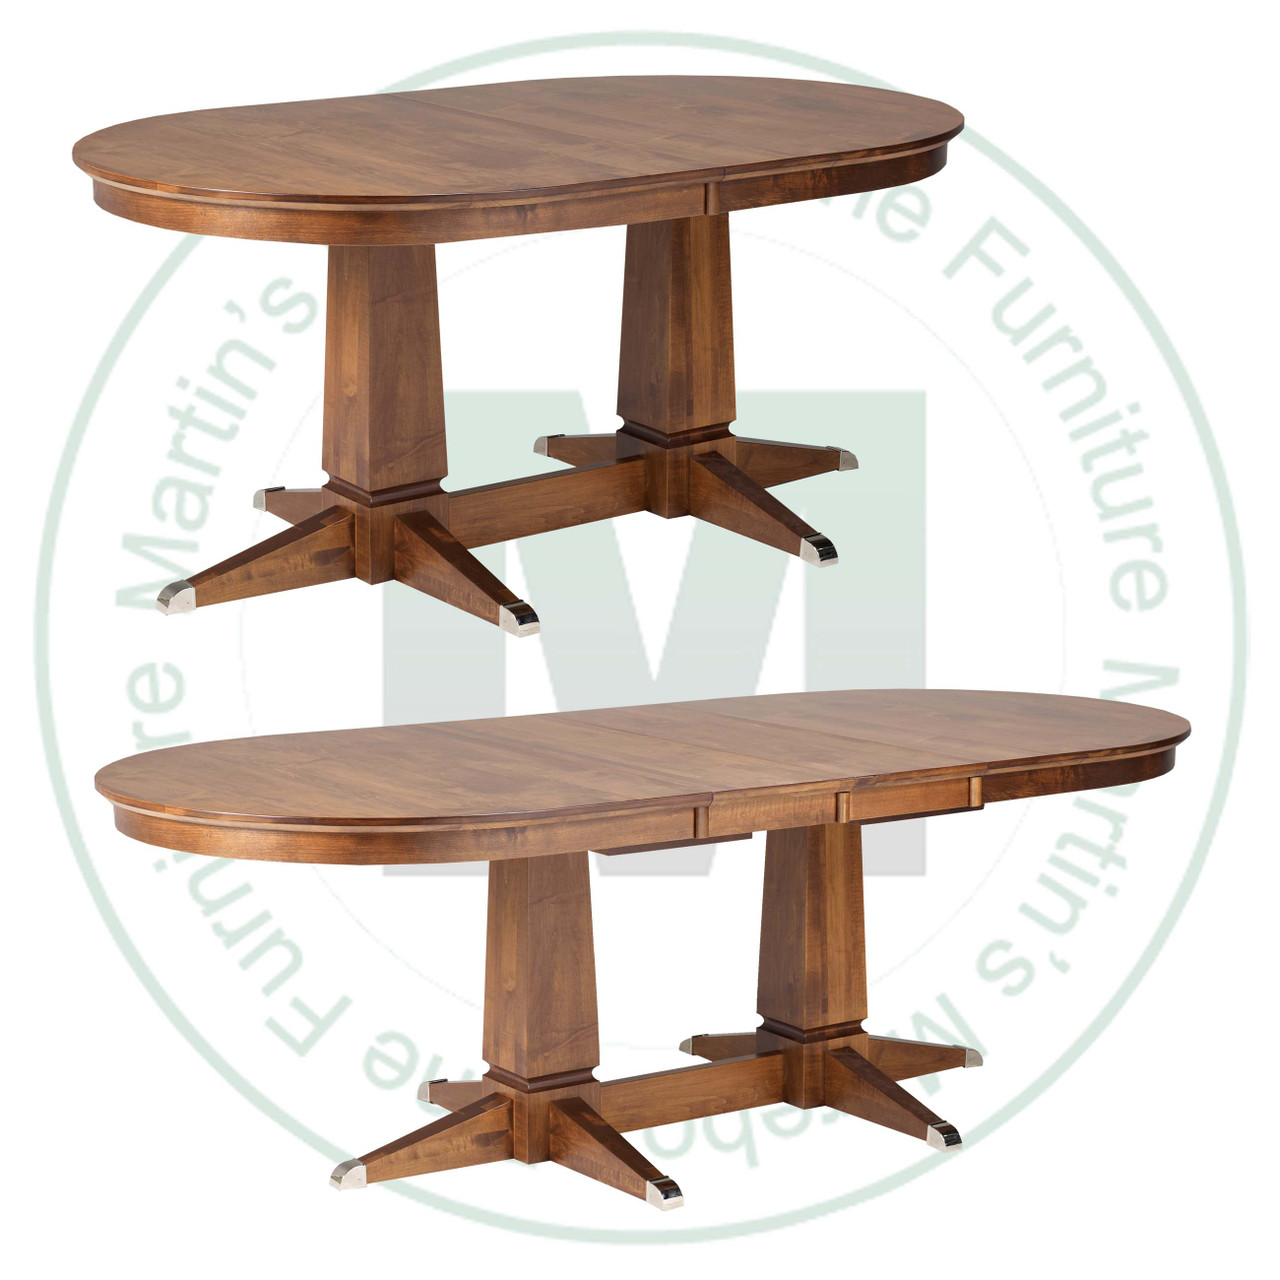 Wormy Maple Sweden Double Pedestal Table 42''D x 96''W x 30''H With 4 - 12'' Leaves